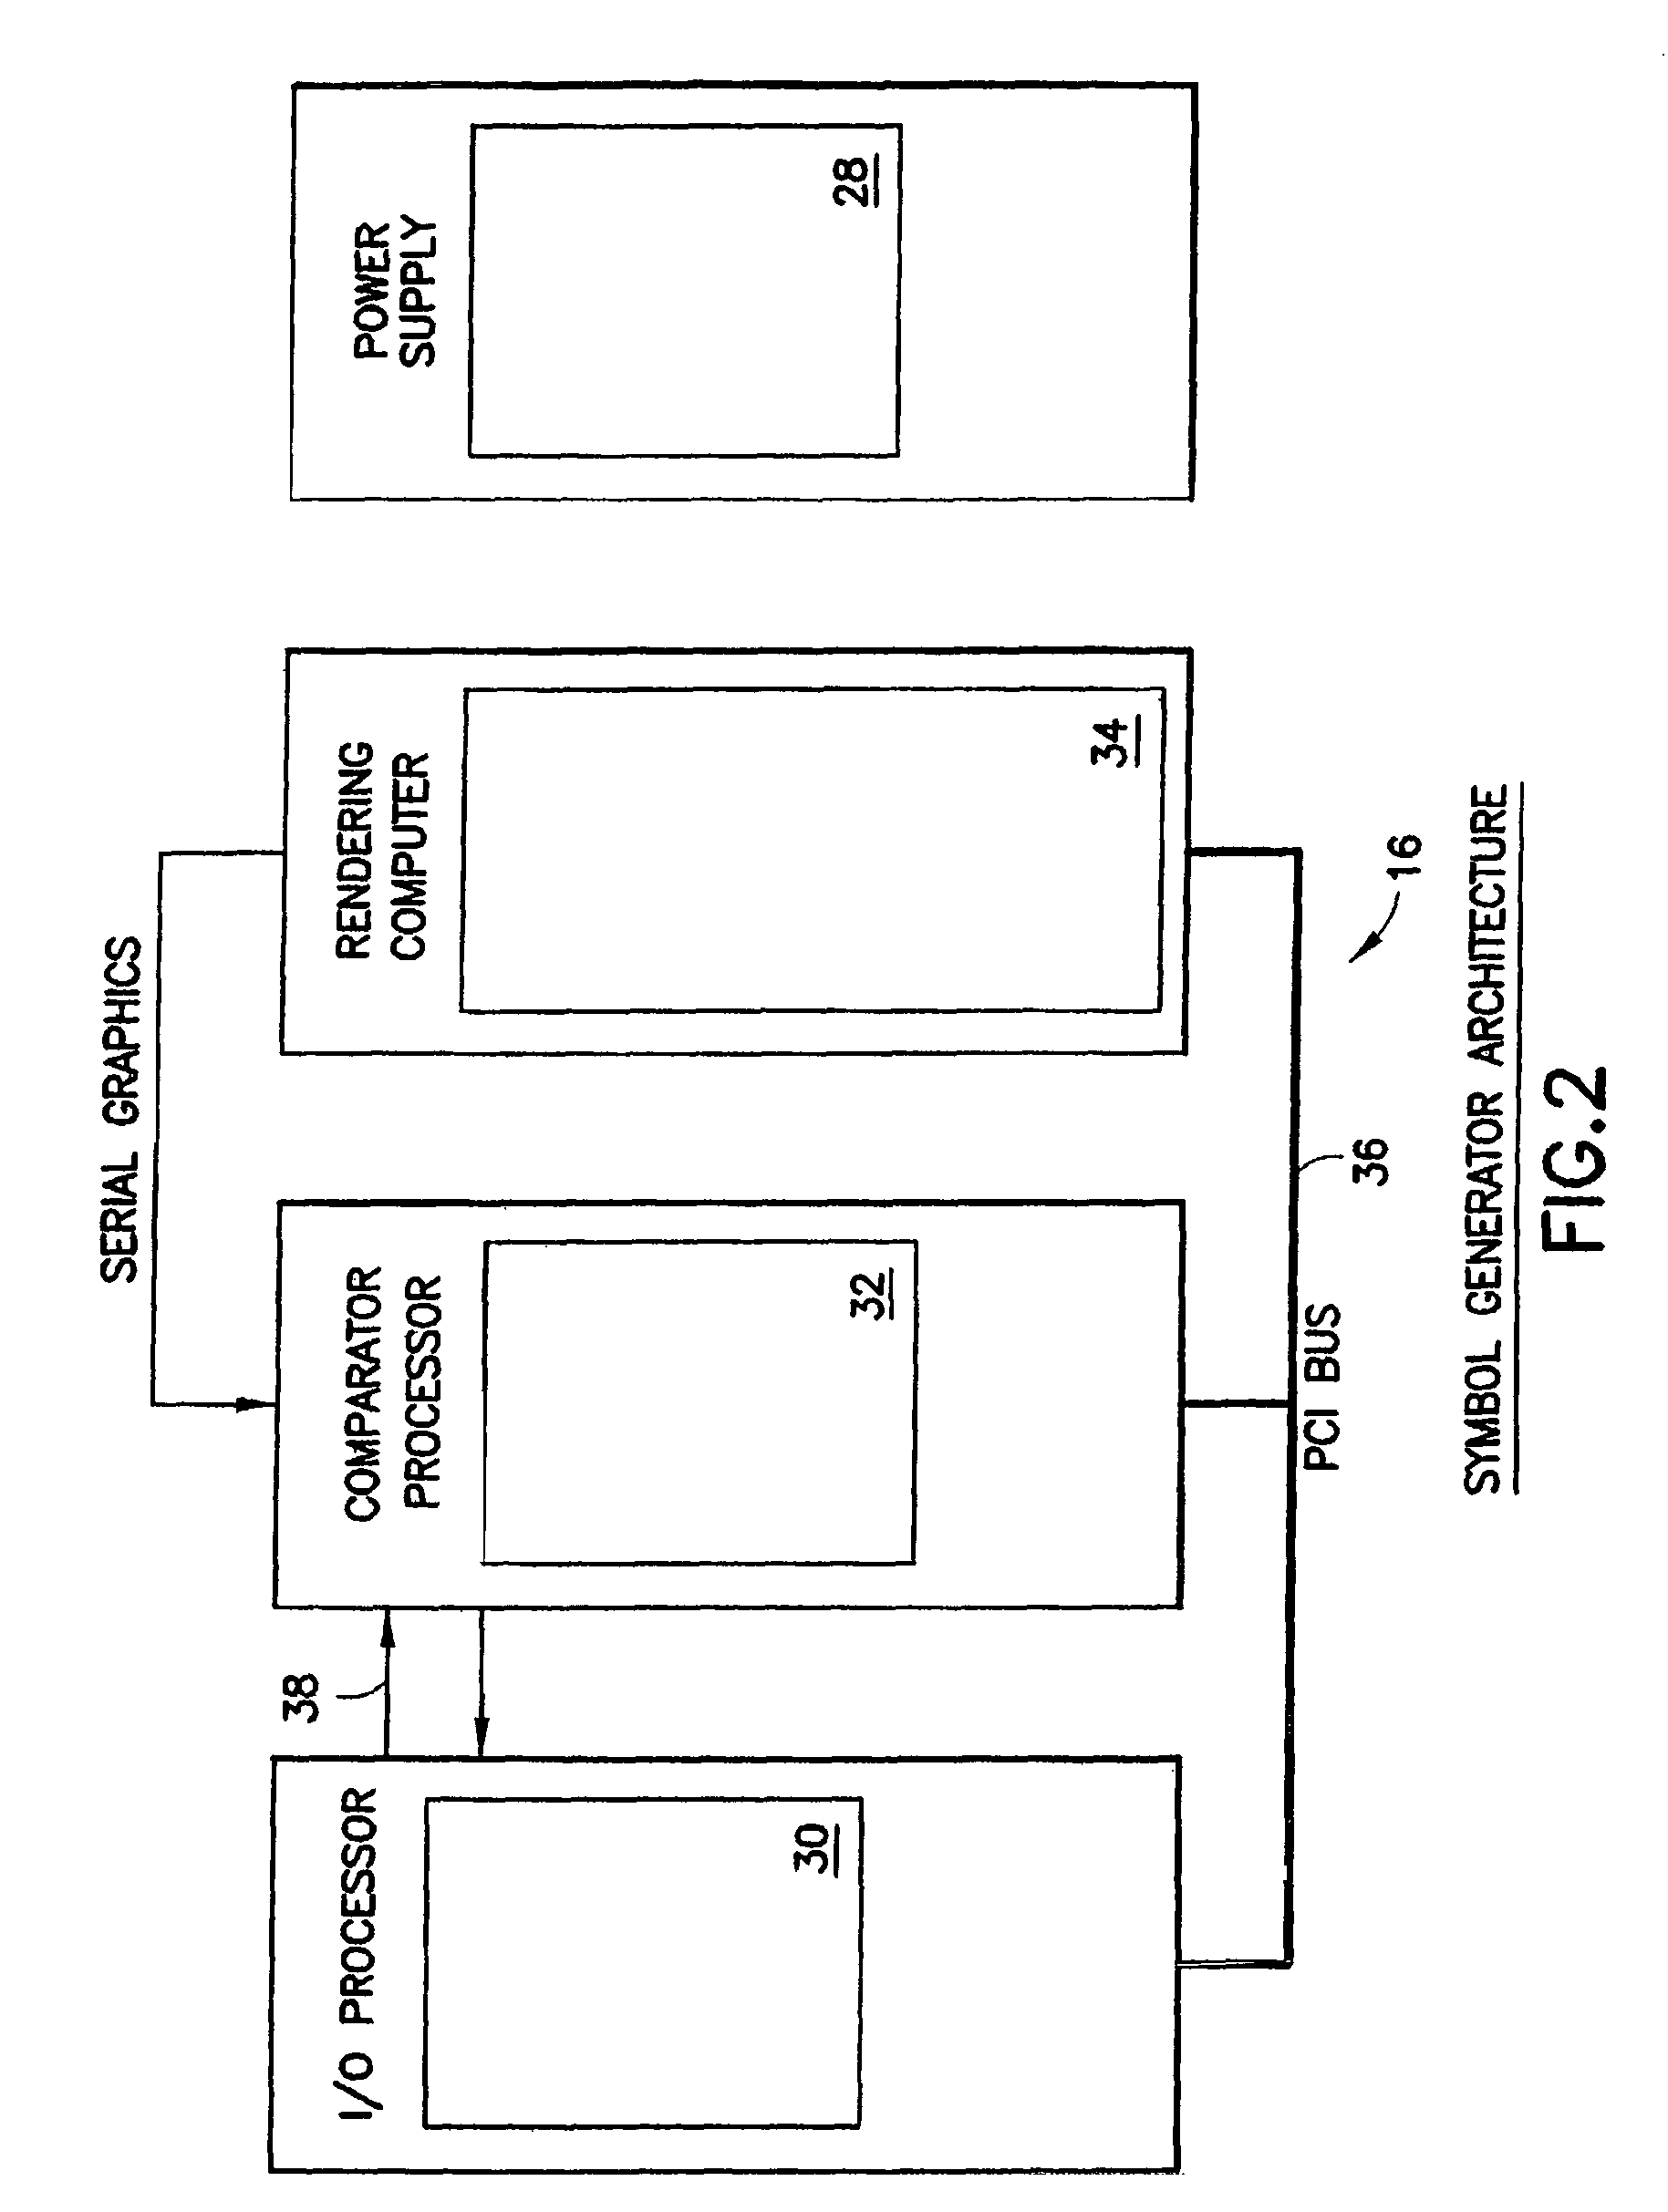 Aircraft flat panel display system with improved information availability